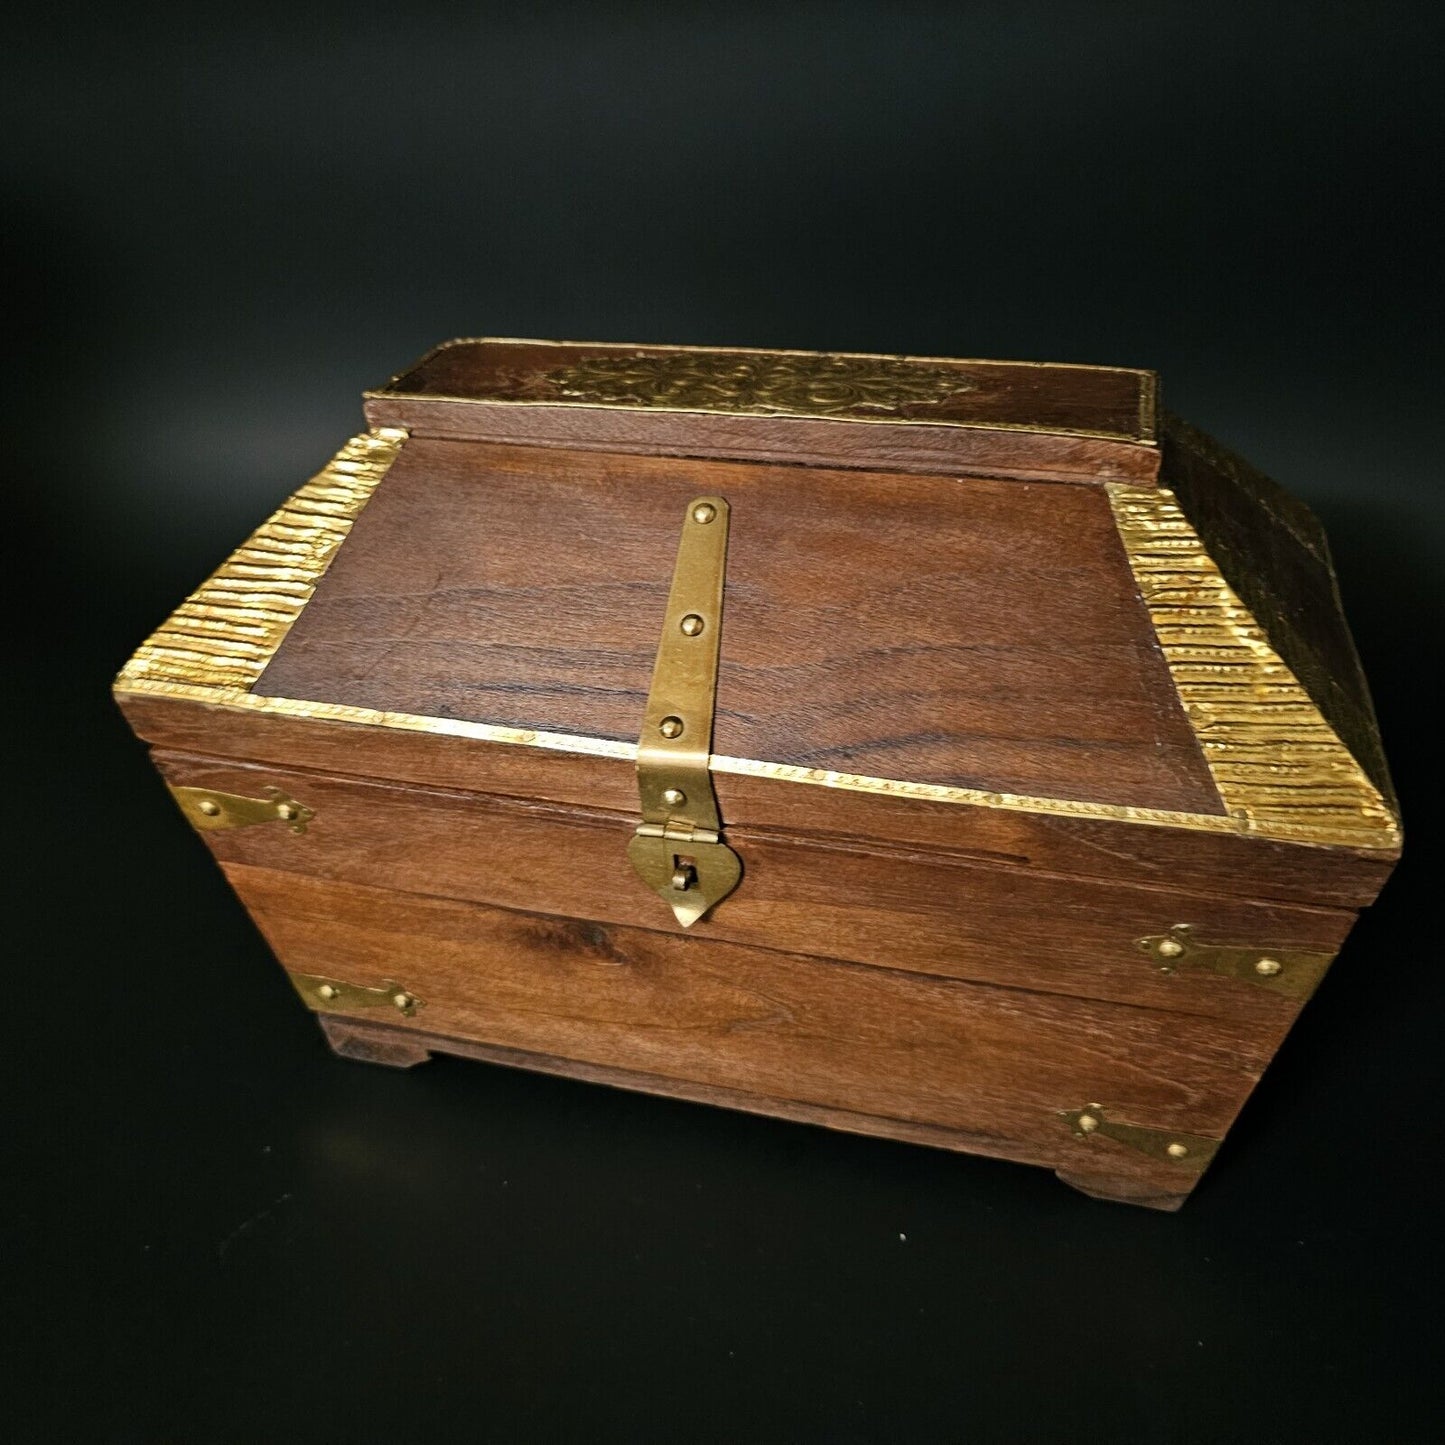 13″ Colonial Style Tea Caddy with Brass Accents